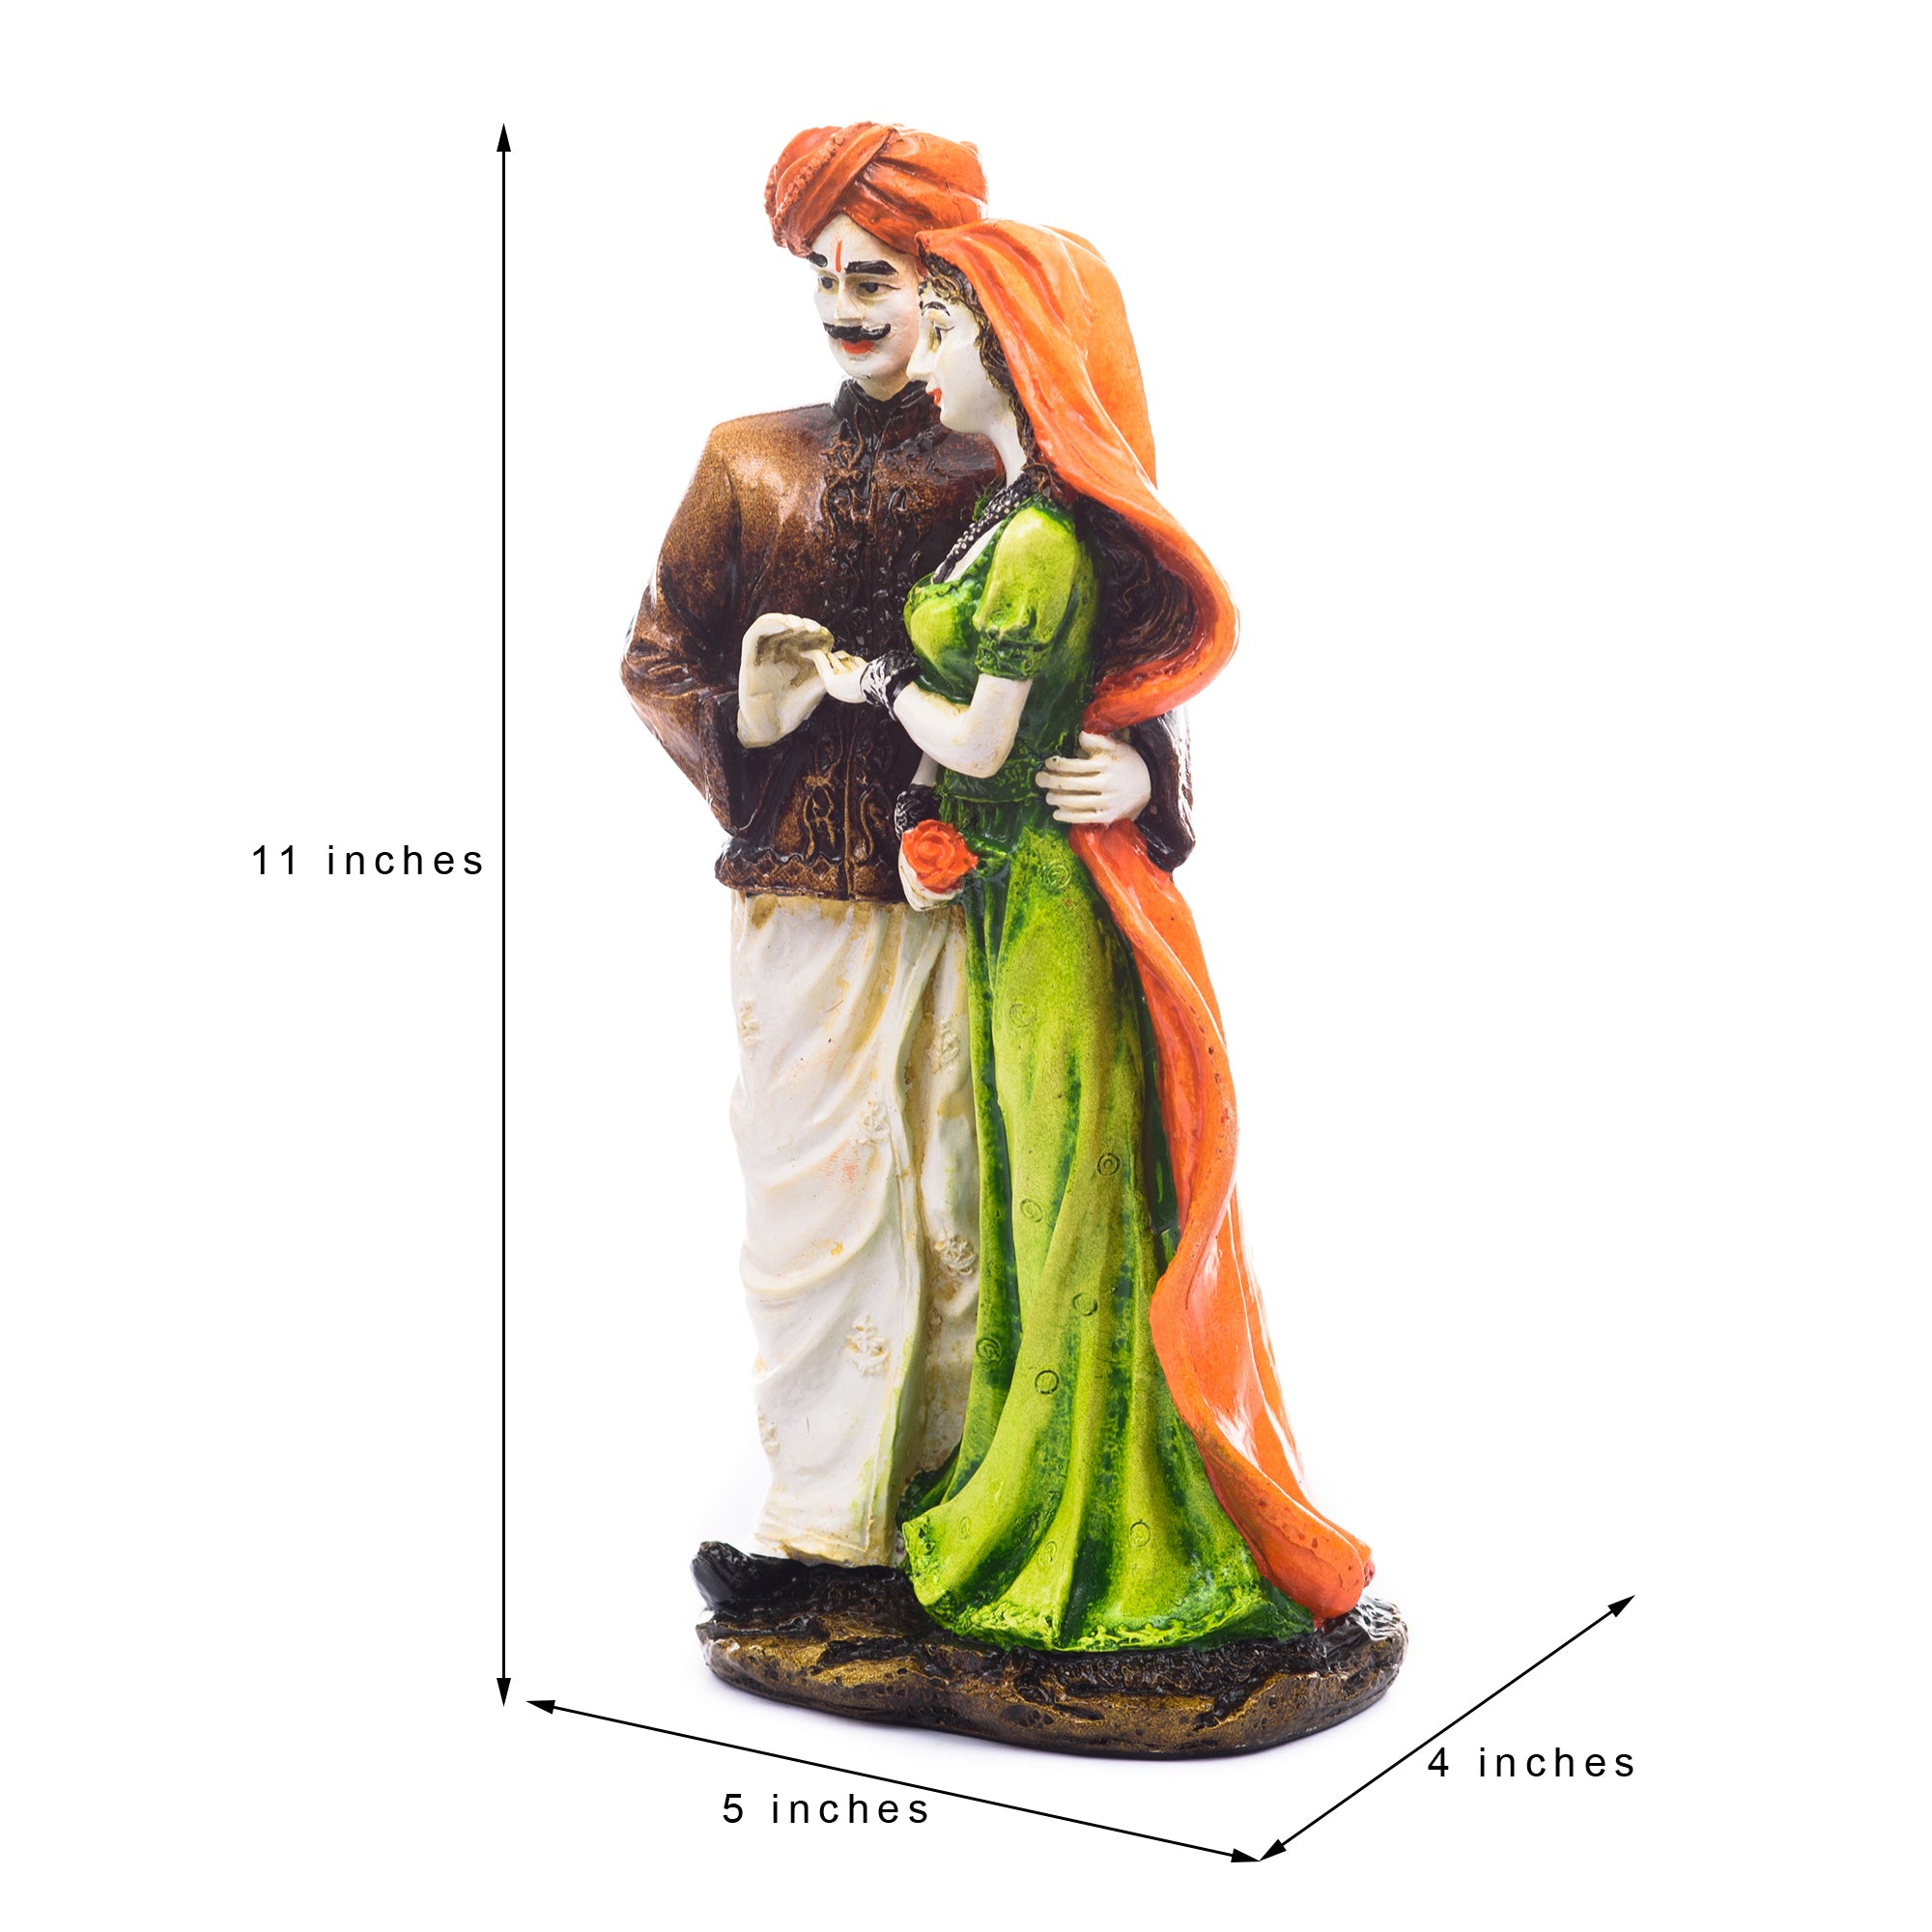 Polyresin Rajasthani Man And Women Statue Handcrafted Human Figurines Decorative Showpiece 1